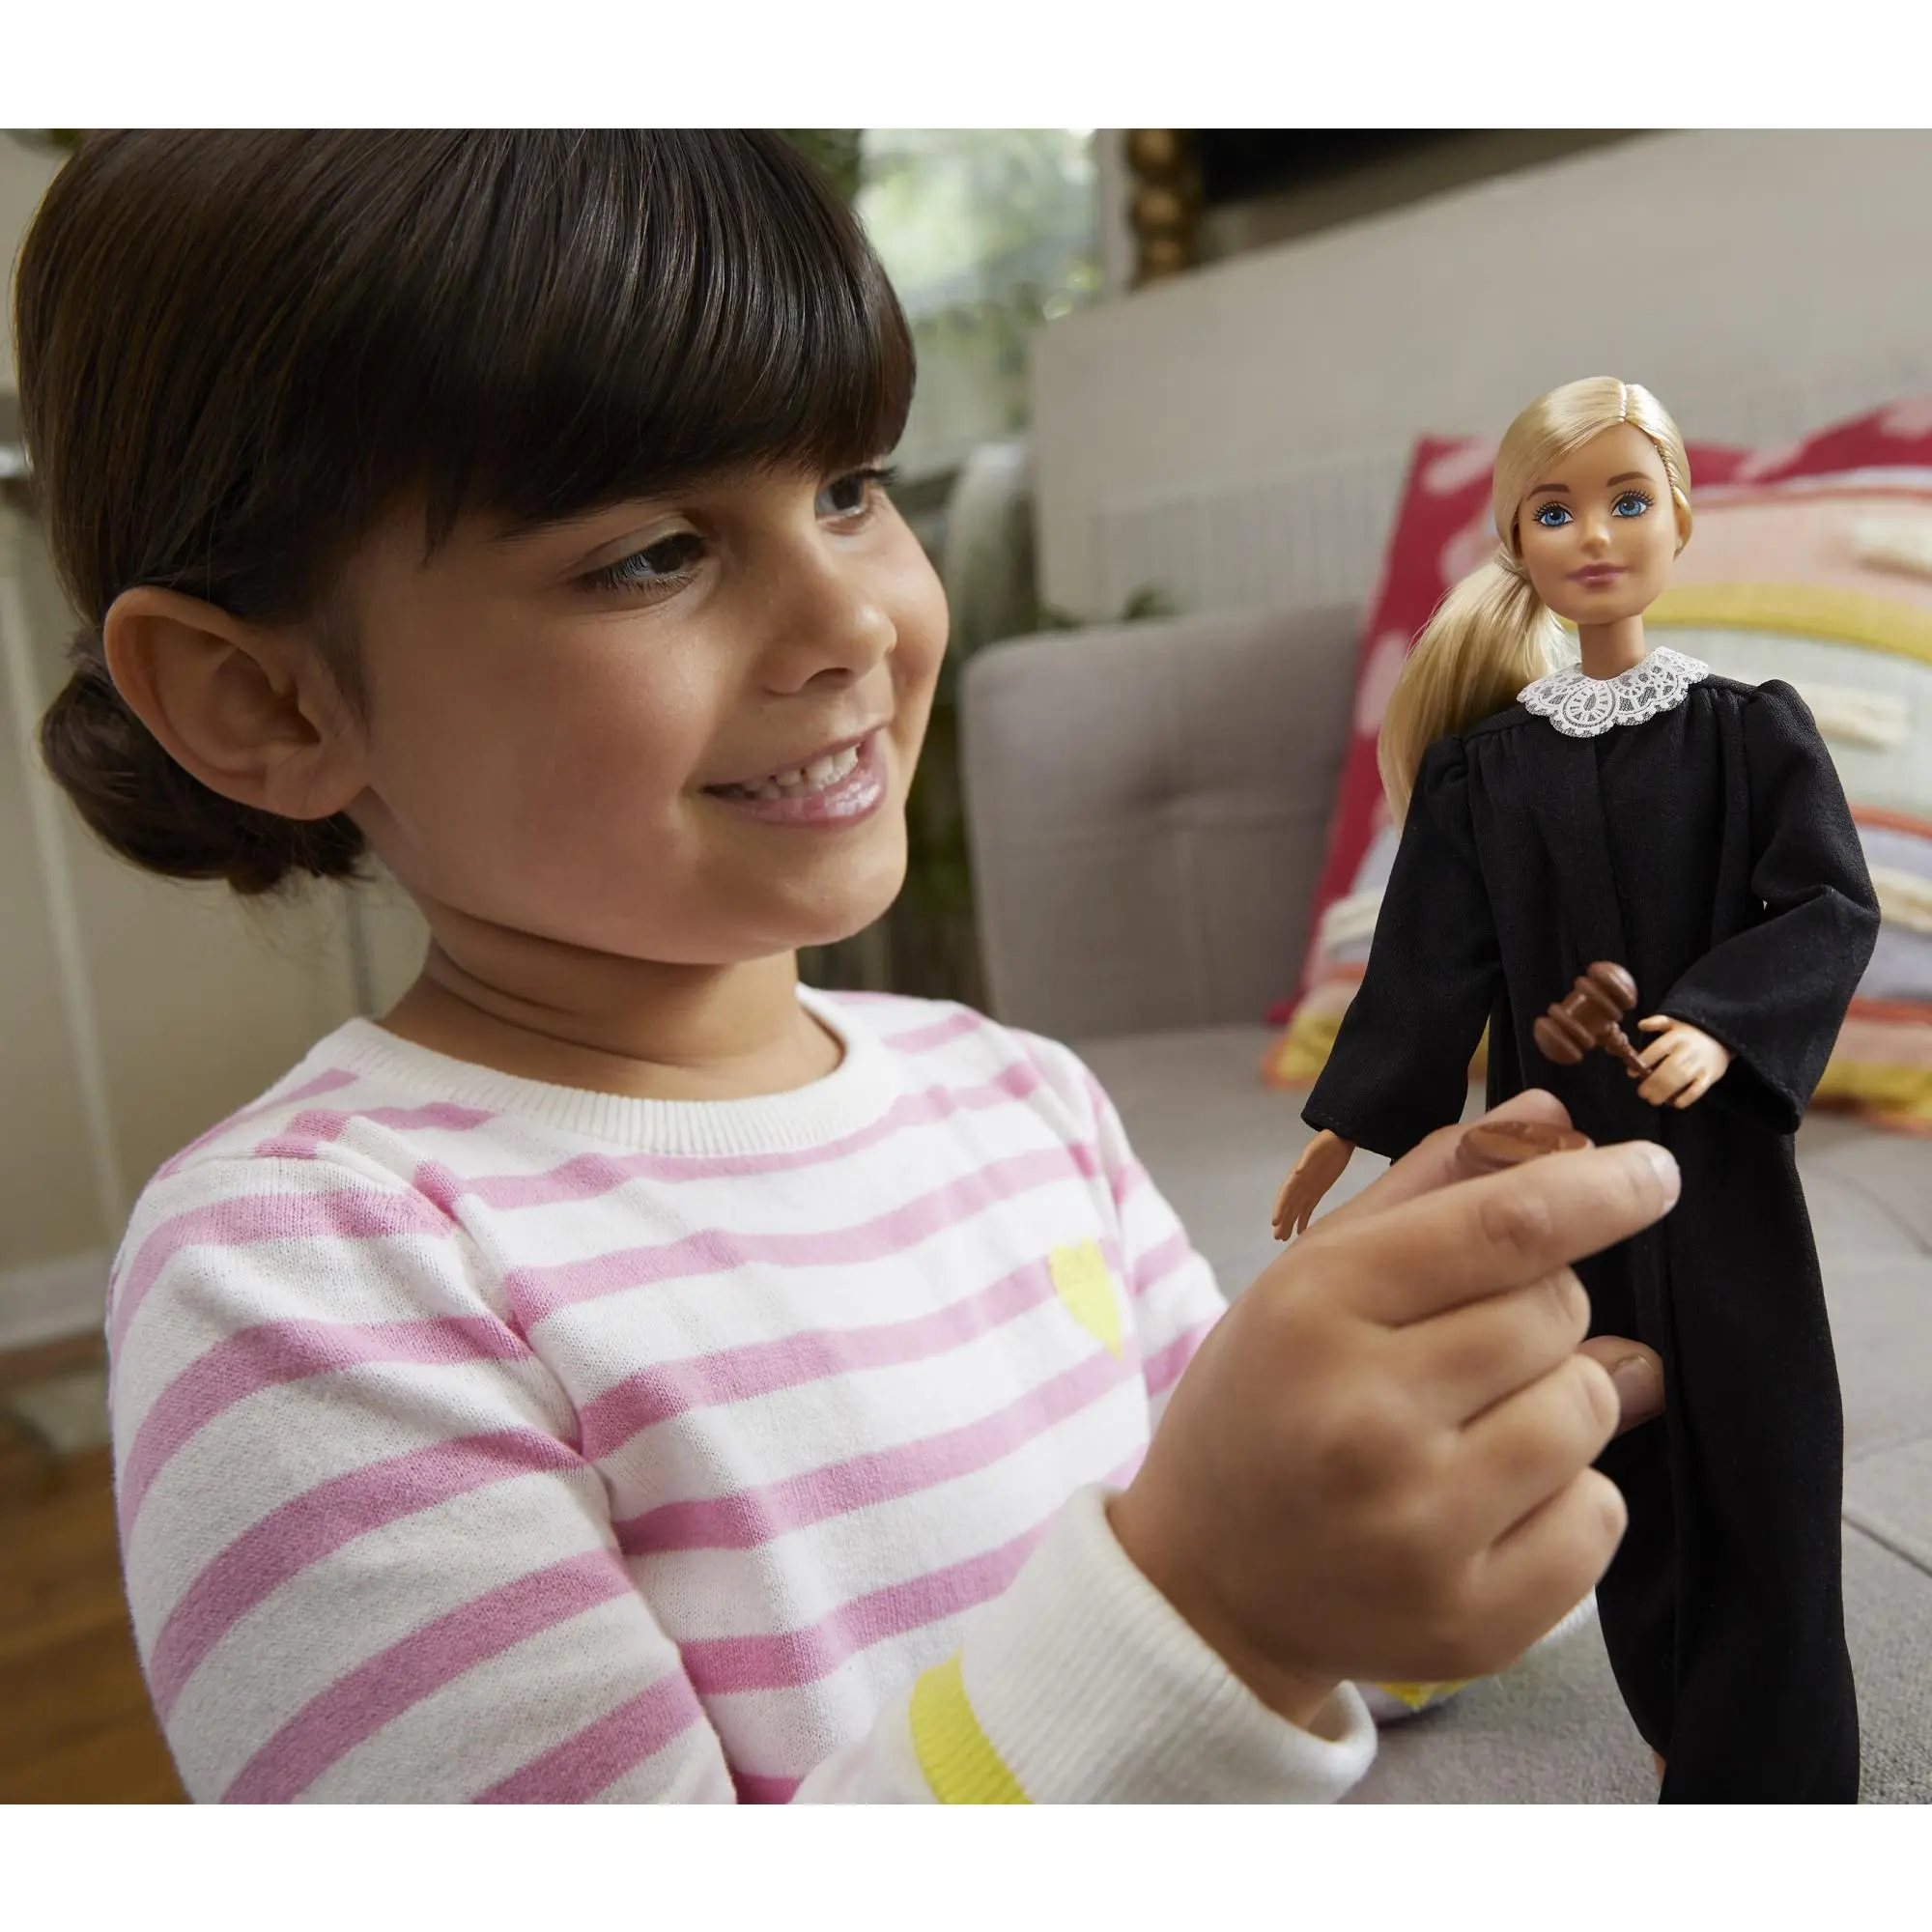 Barbie introducing Judge Barbie doll with hopes to inspire girls to  become judges  WSET